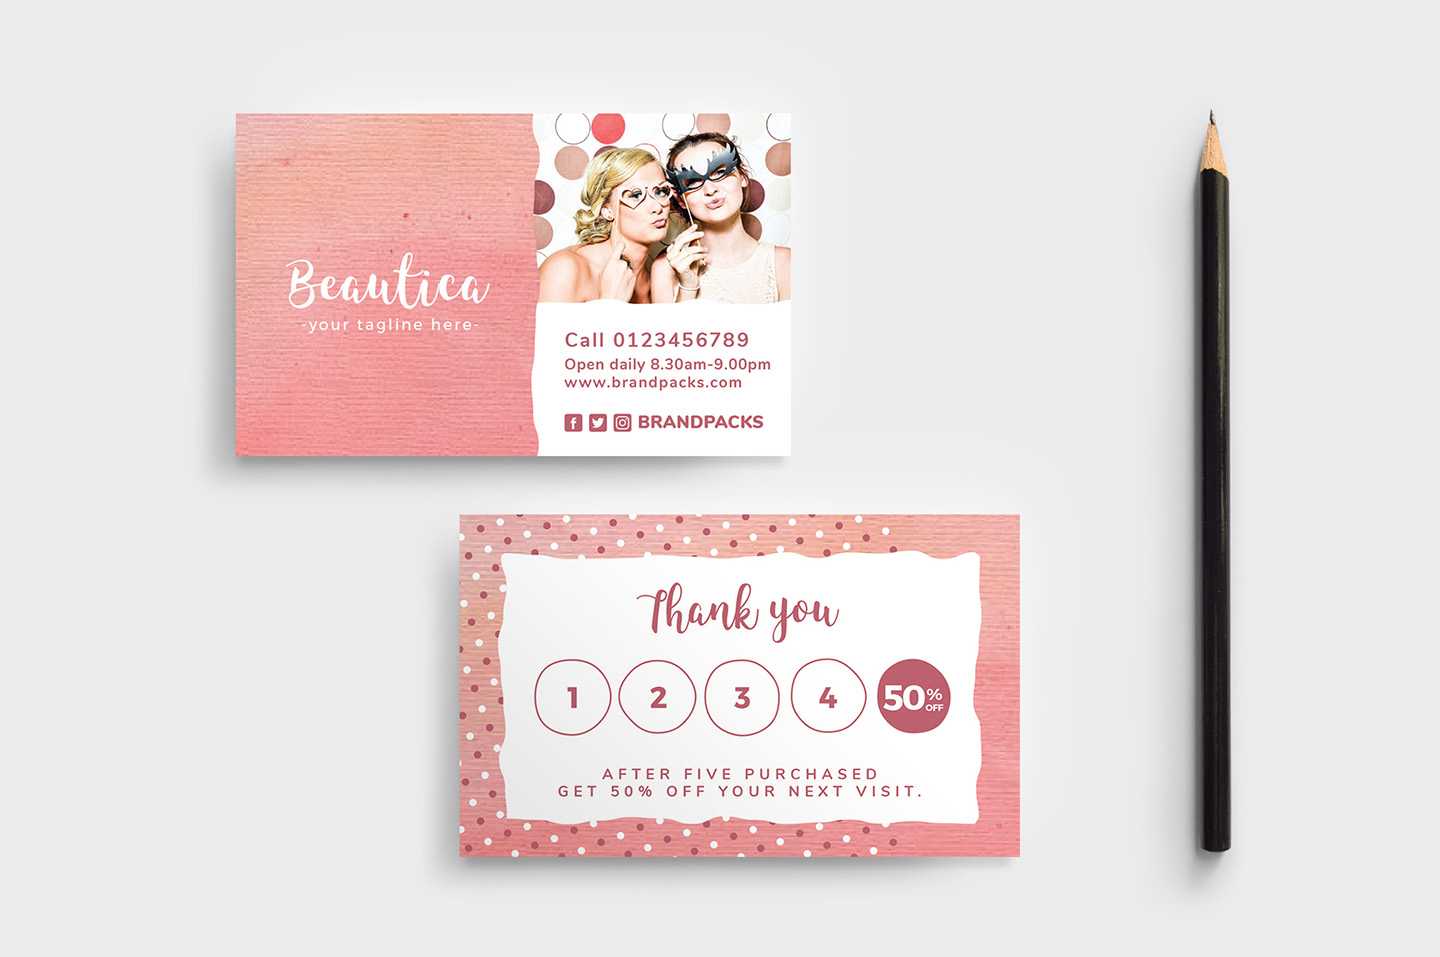 Free Loyalty Card Templates - Psd, Ai & Vector - Brandpacks Throughout Loyalty Card Design Template